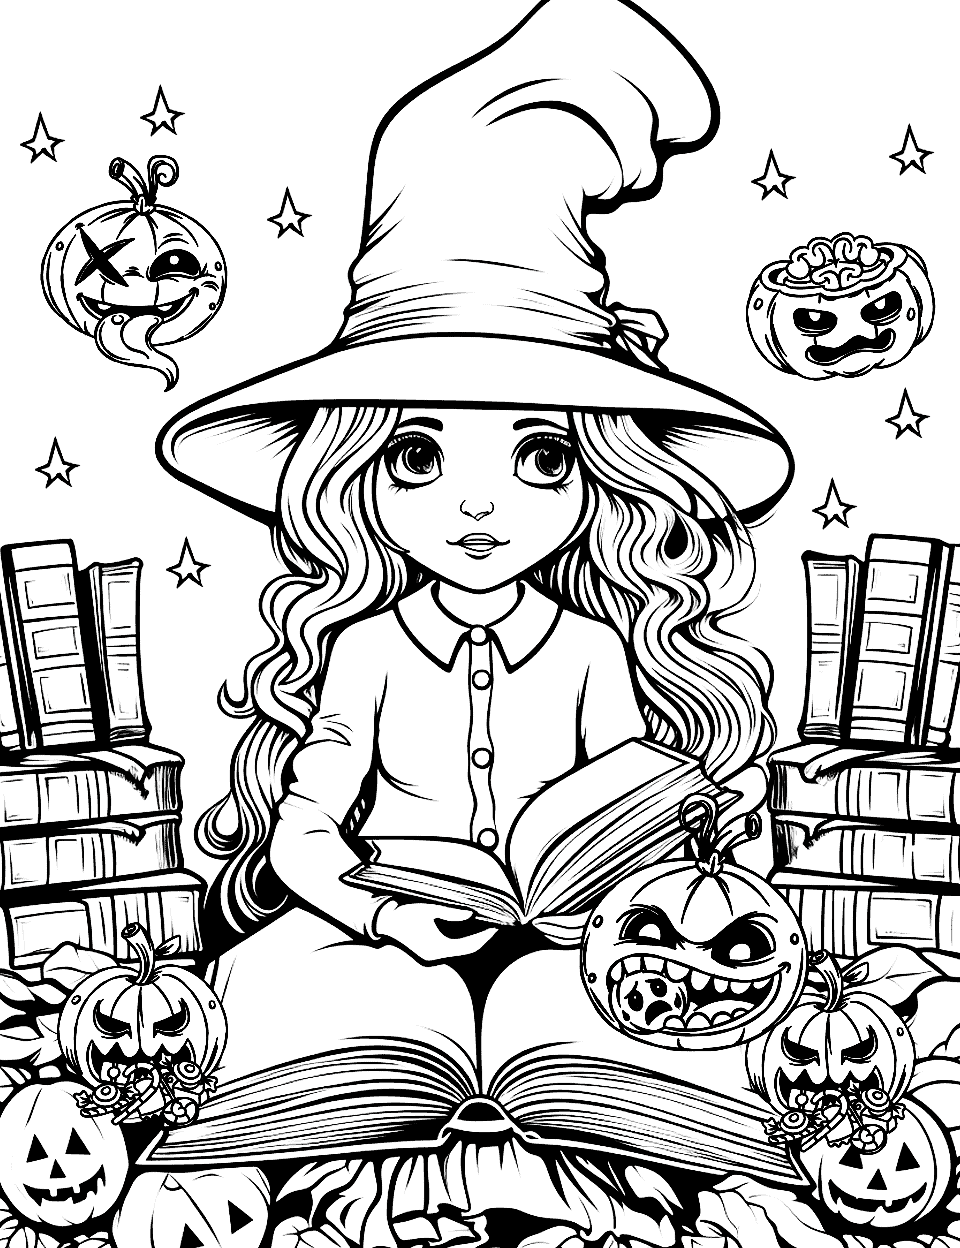 Advanced Witch Spell Crafting Coloring Page - A witch in a library, surrounded by ancient spell books and magical artifacts.